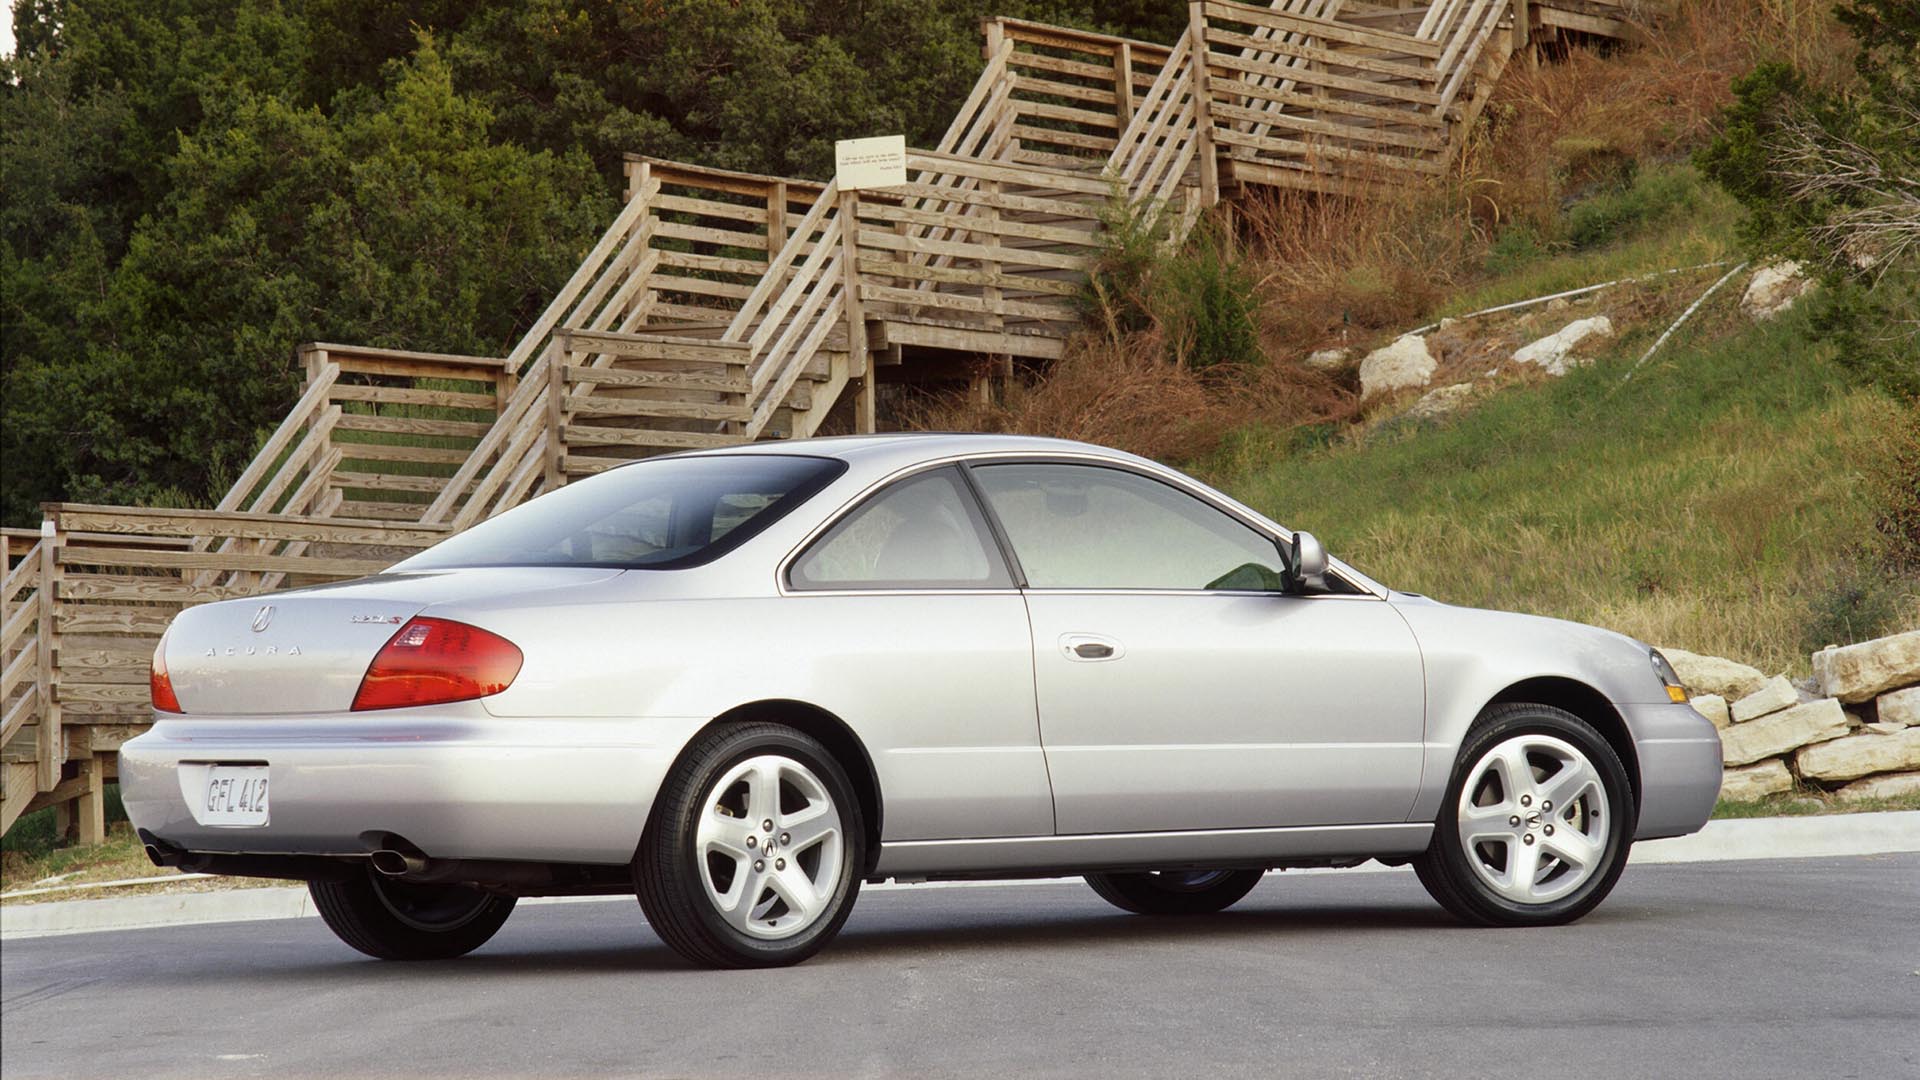 <p class="caption-title">2001 Acura 3.2CL Type S</p>, Acura debuted the 3.2CL Type S for the 2001 model year., <i>Acura</i>